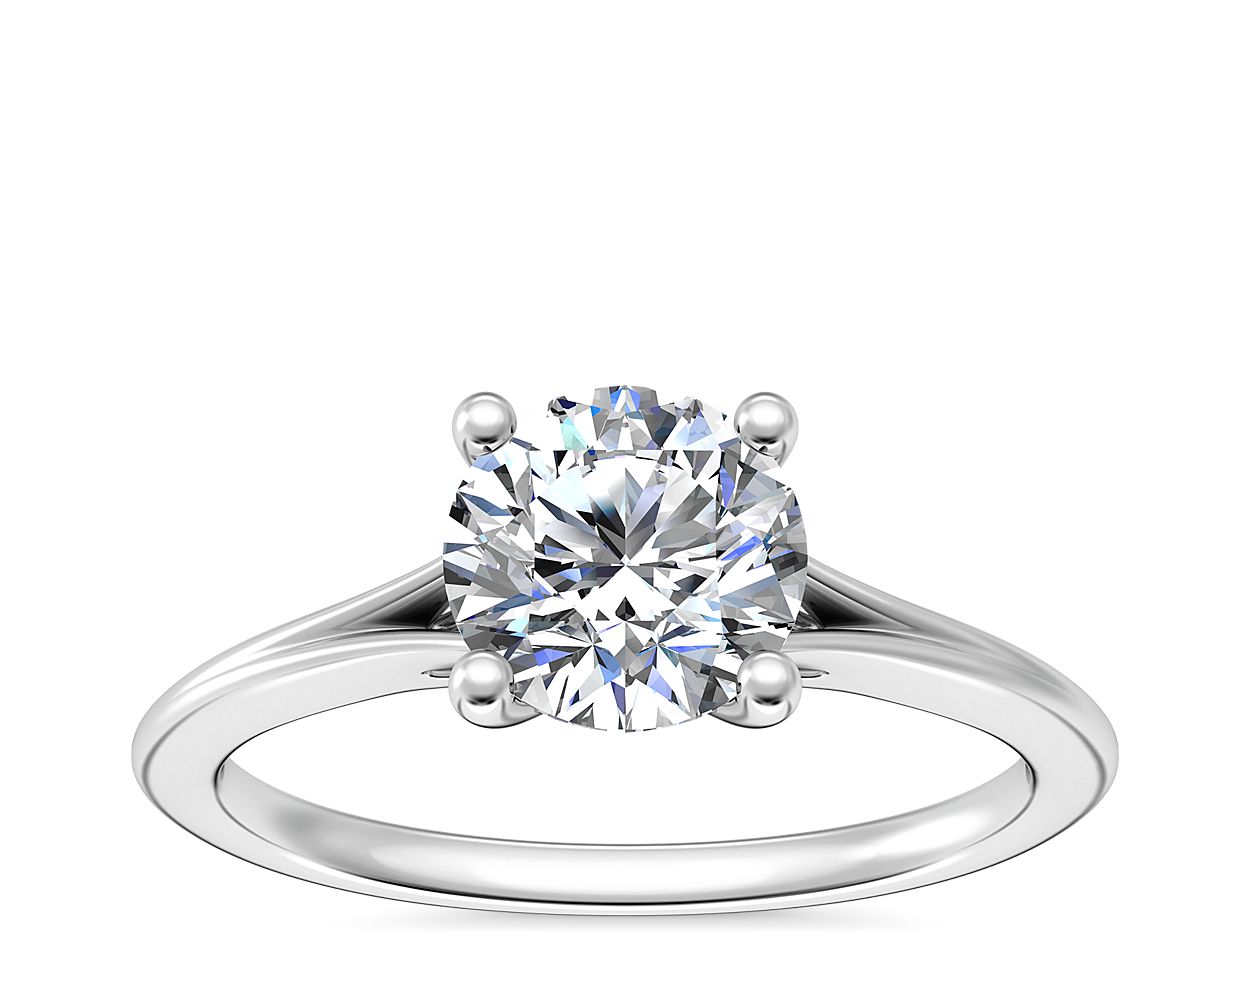 Diamond Ring Appraisal: How Much Does Your Ring Cost? | Worthy